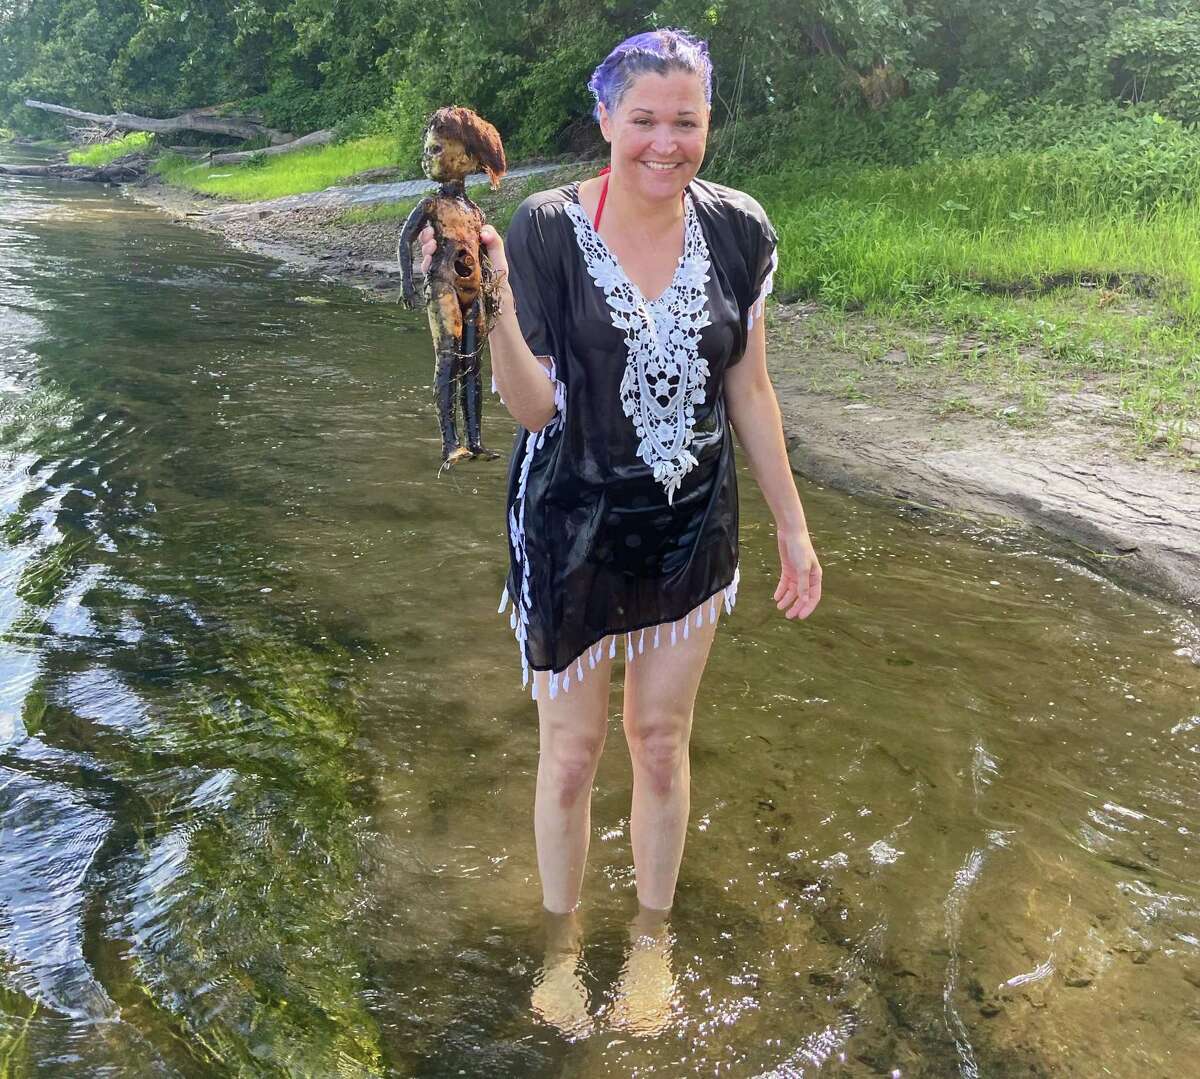 Sally Grossman with the doll she fished out of the Connecticut River.